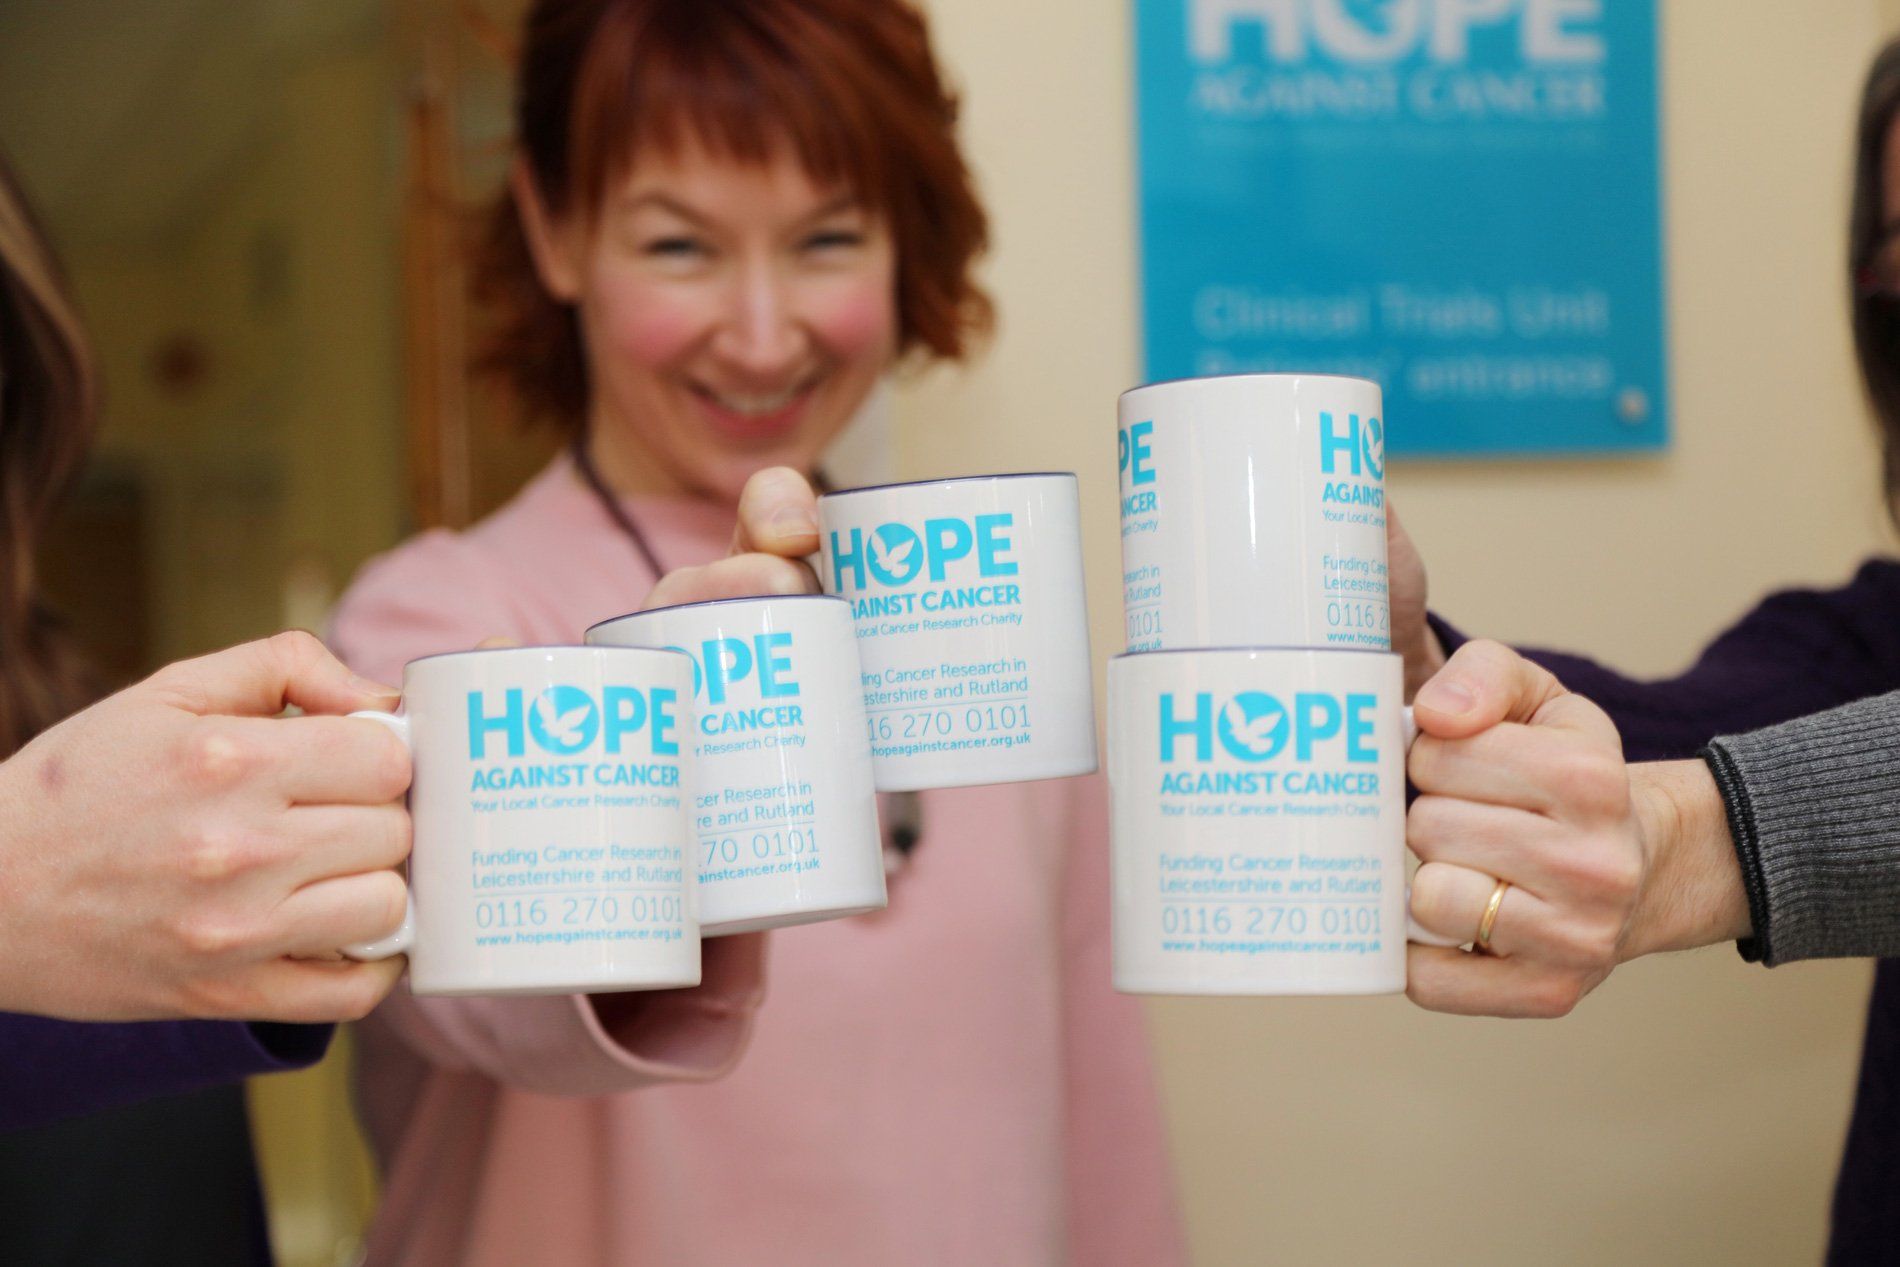 Fundraise for Hope Against Cancer